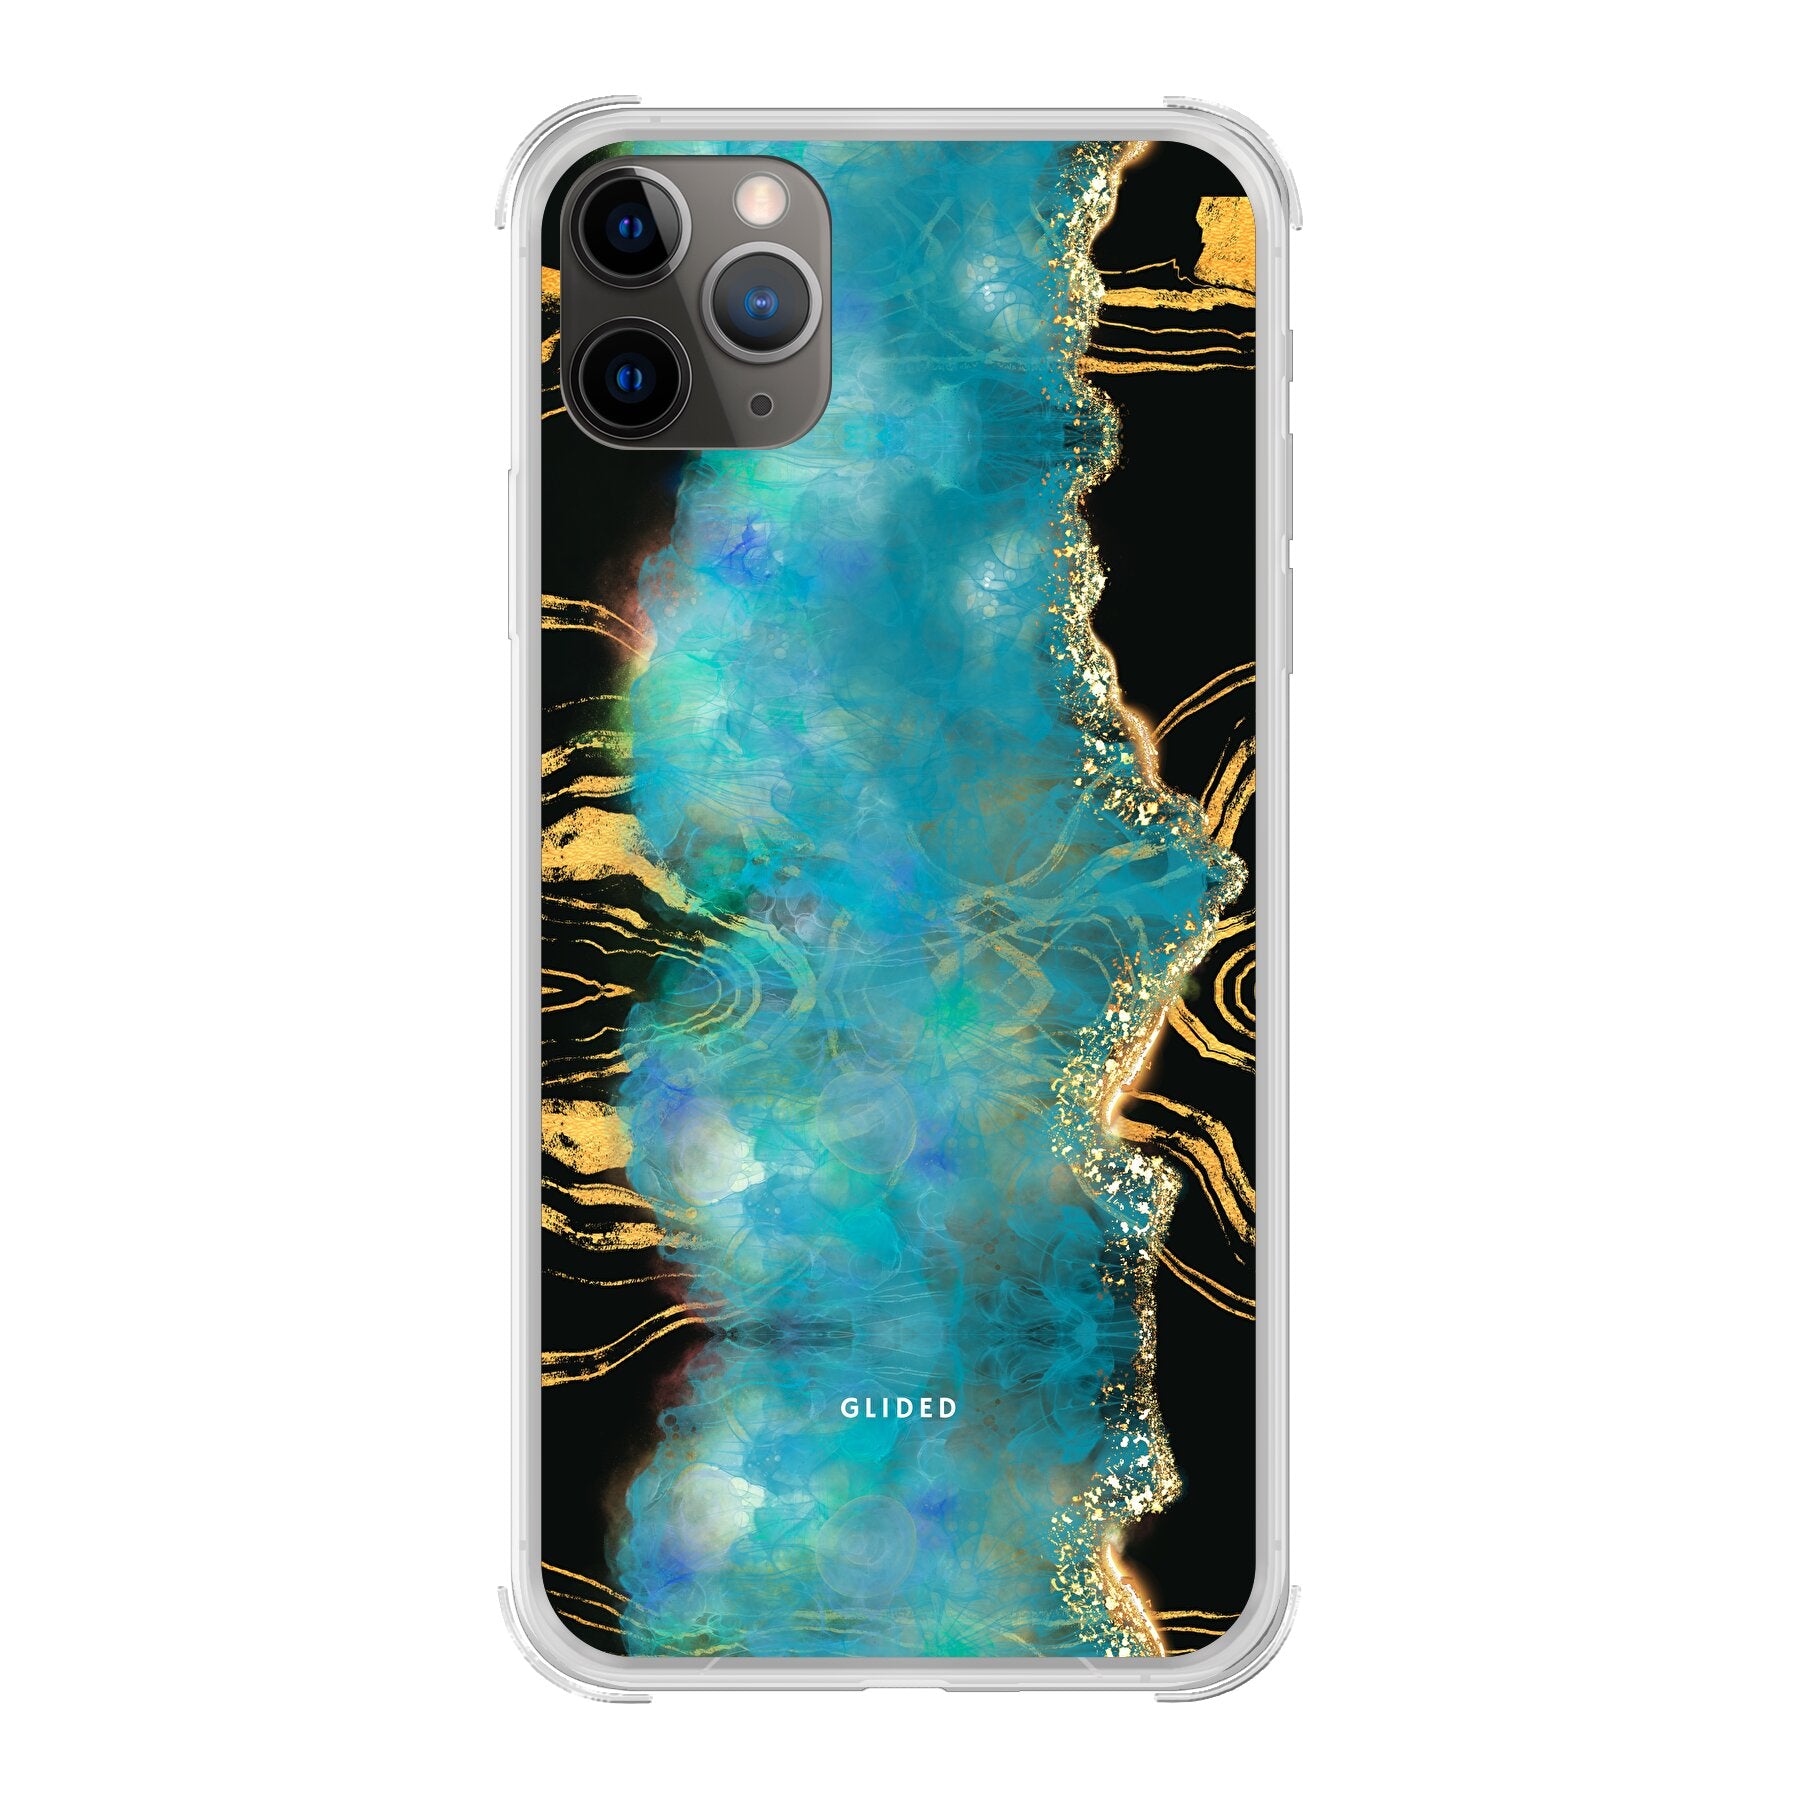 Waterly - iPhone 11 Pro Handyhülle Bumper case